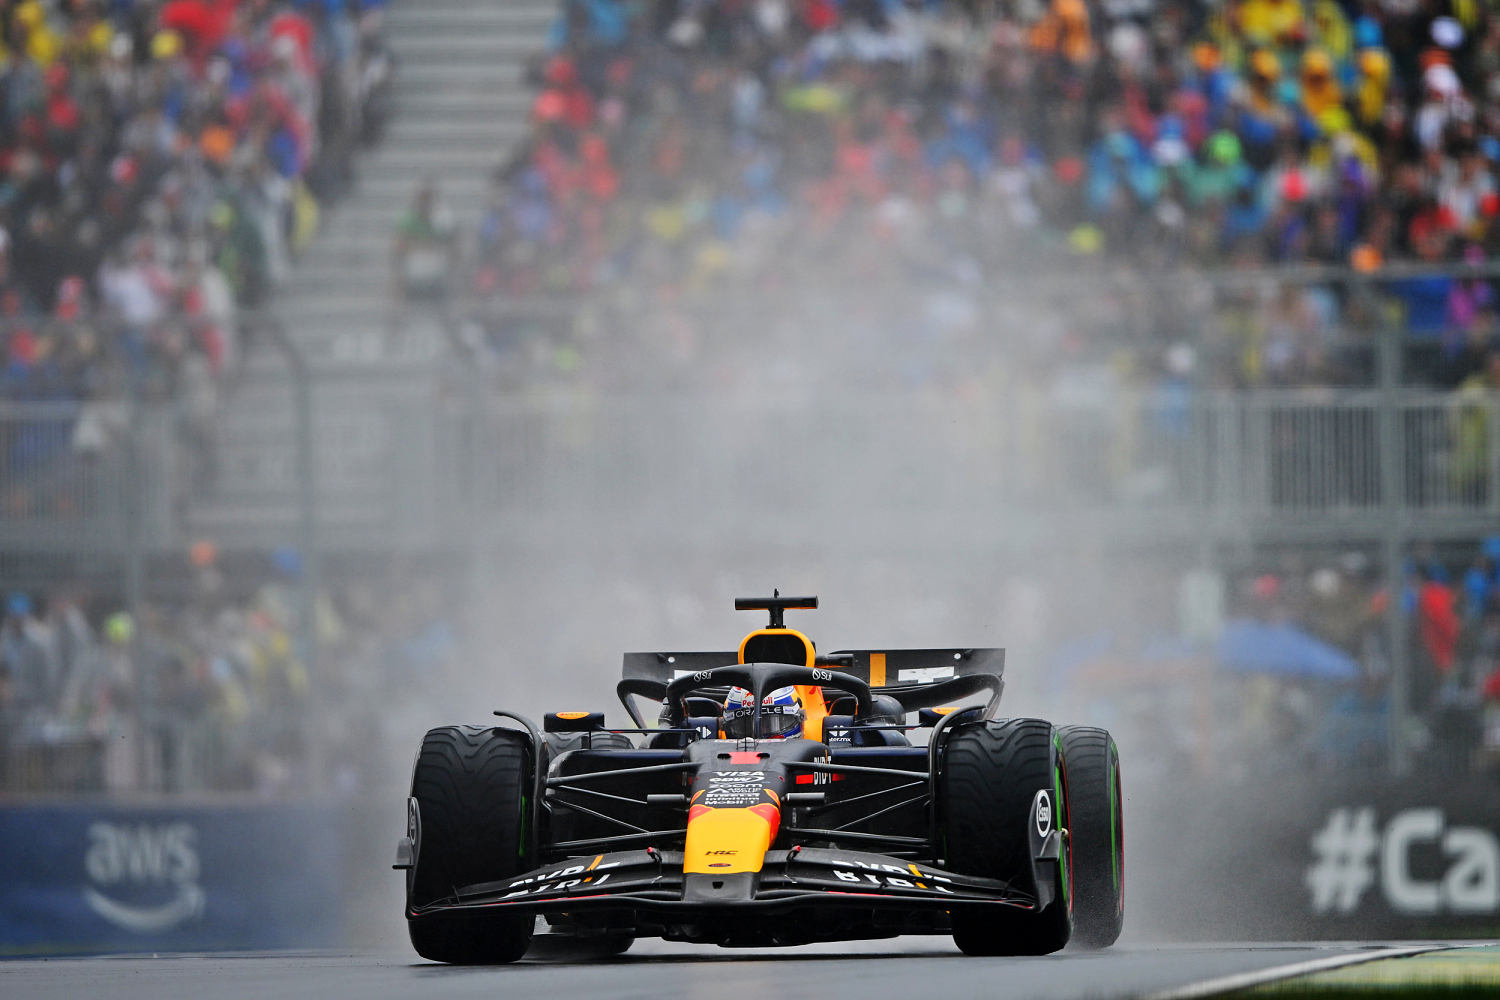 Max Verstappen wins a rainy and chaotic F1 race in Canada as rivals challenge Red Bull